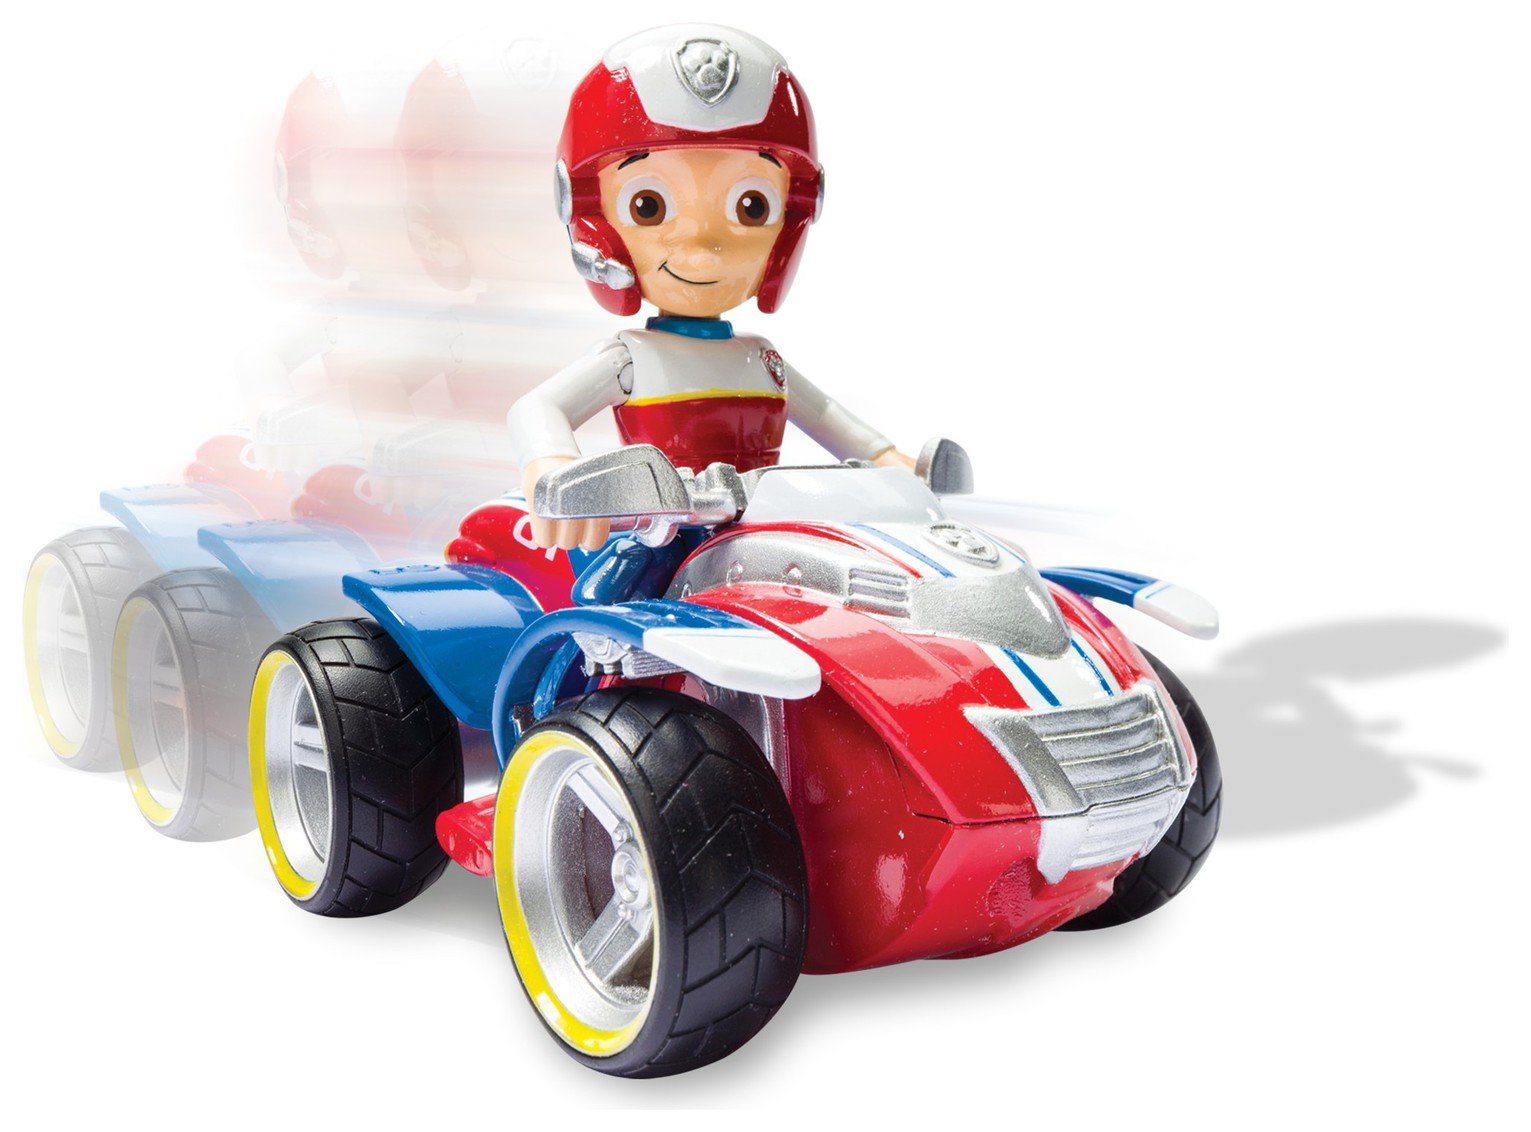 ryder and atv toy